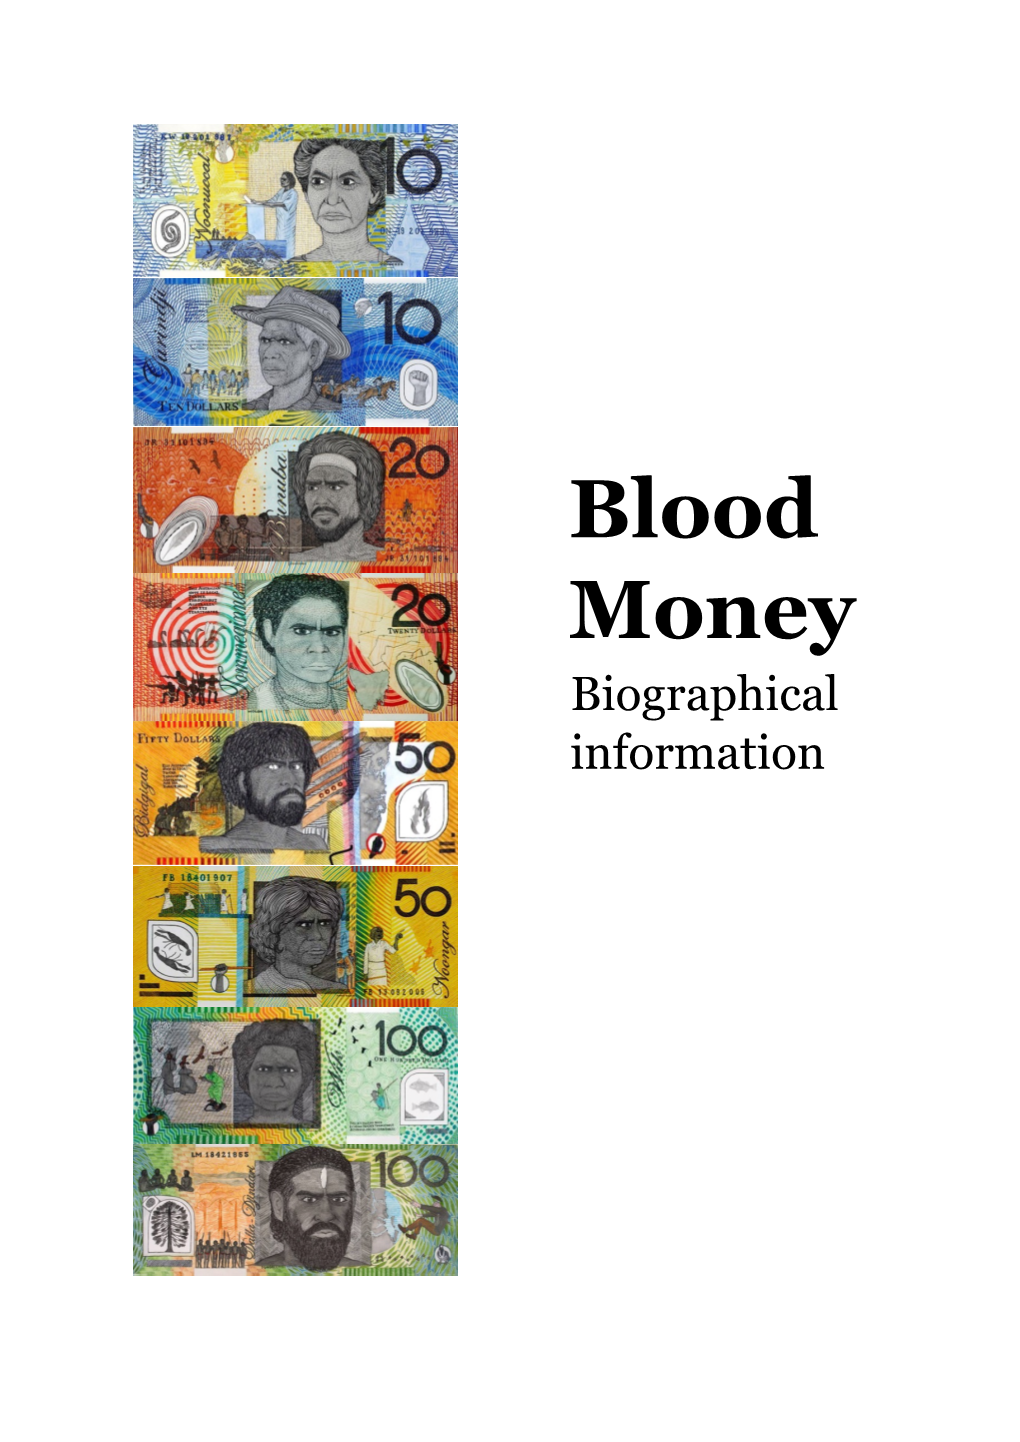 Blood Money Currency Exchange Terminal Originally Commissioned by the Institute of Modern Art, Brisbane in 2018